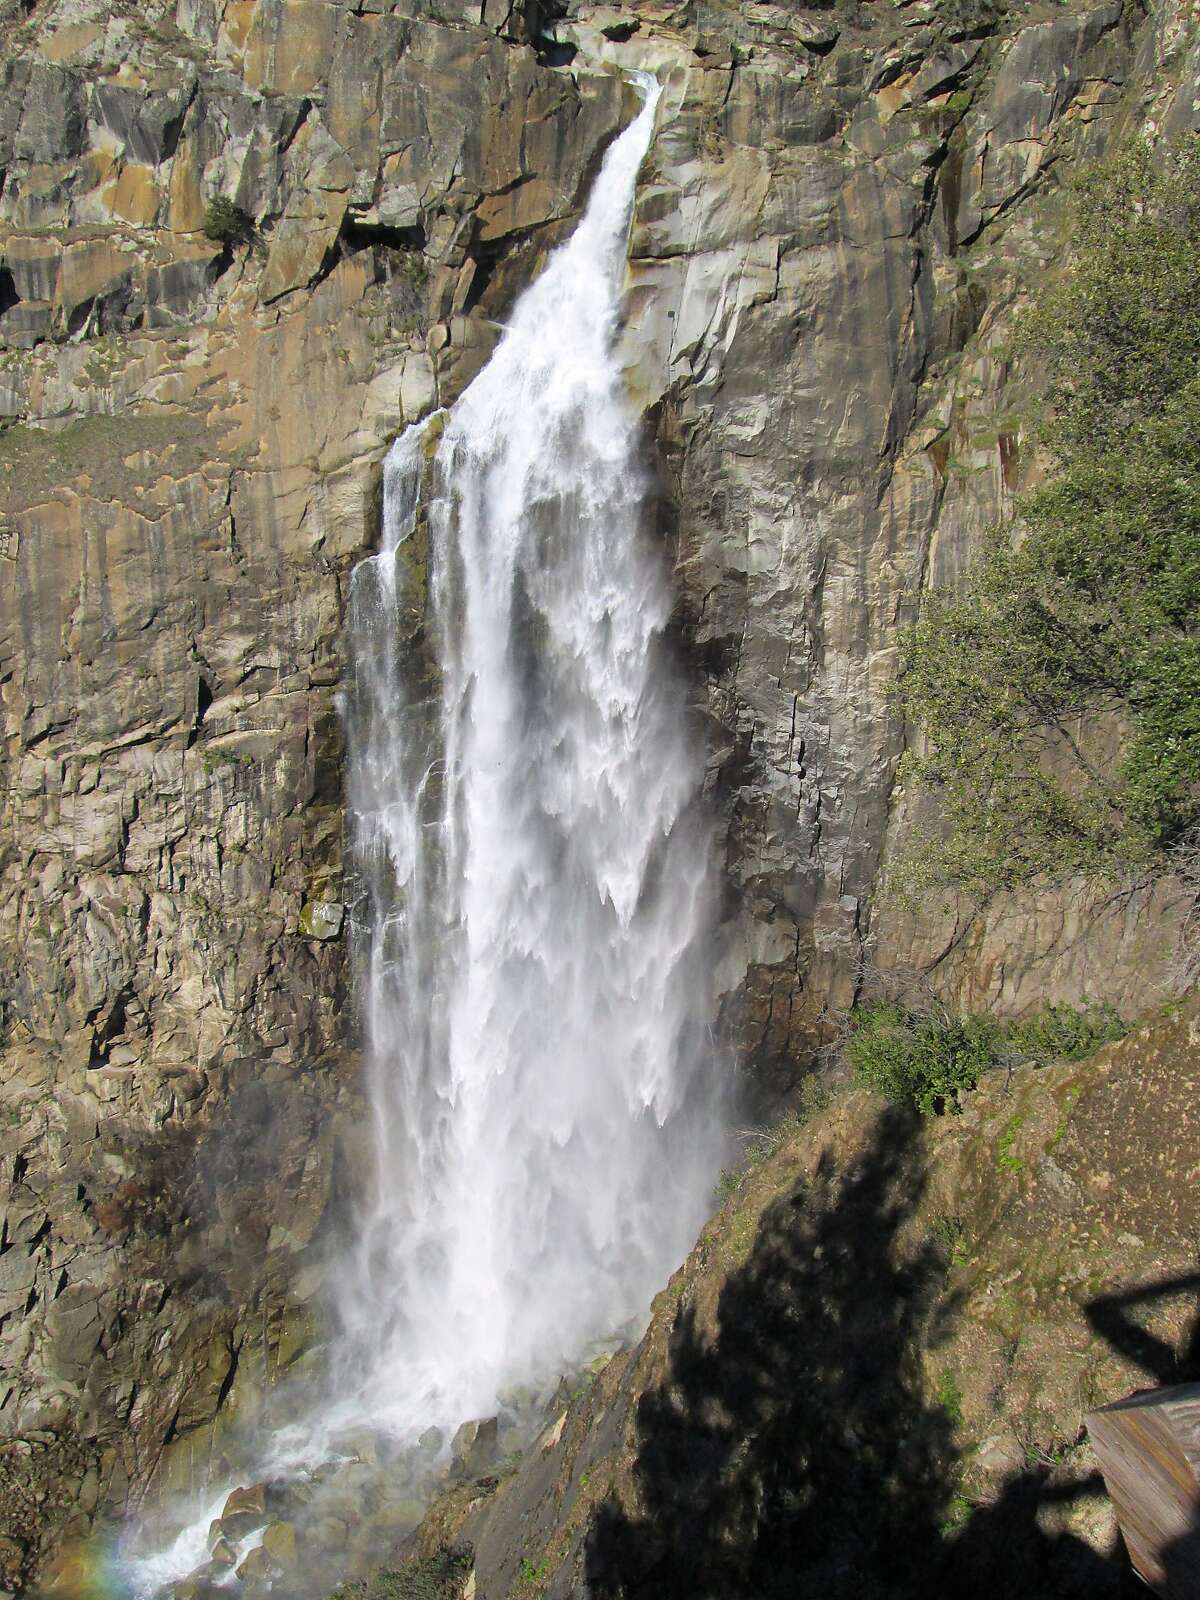 From a viewing deck on a knife-edge outcrop, visitors get a full frontal of 410-foot Feather Falls